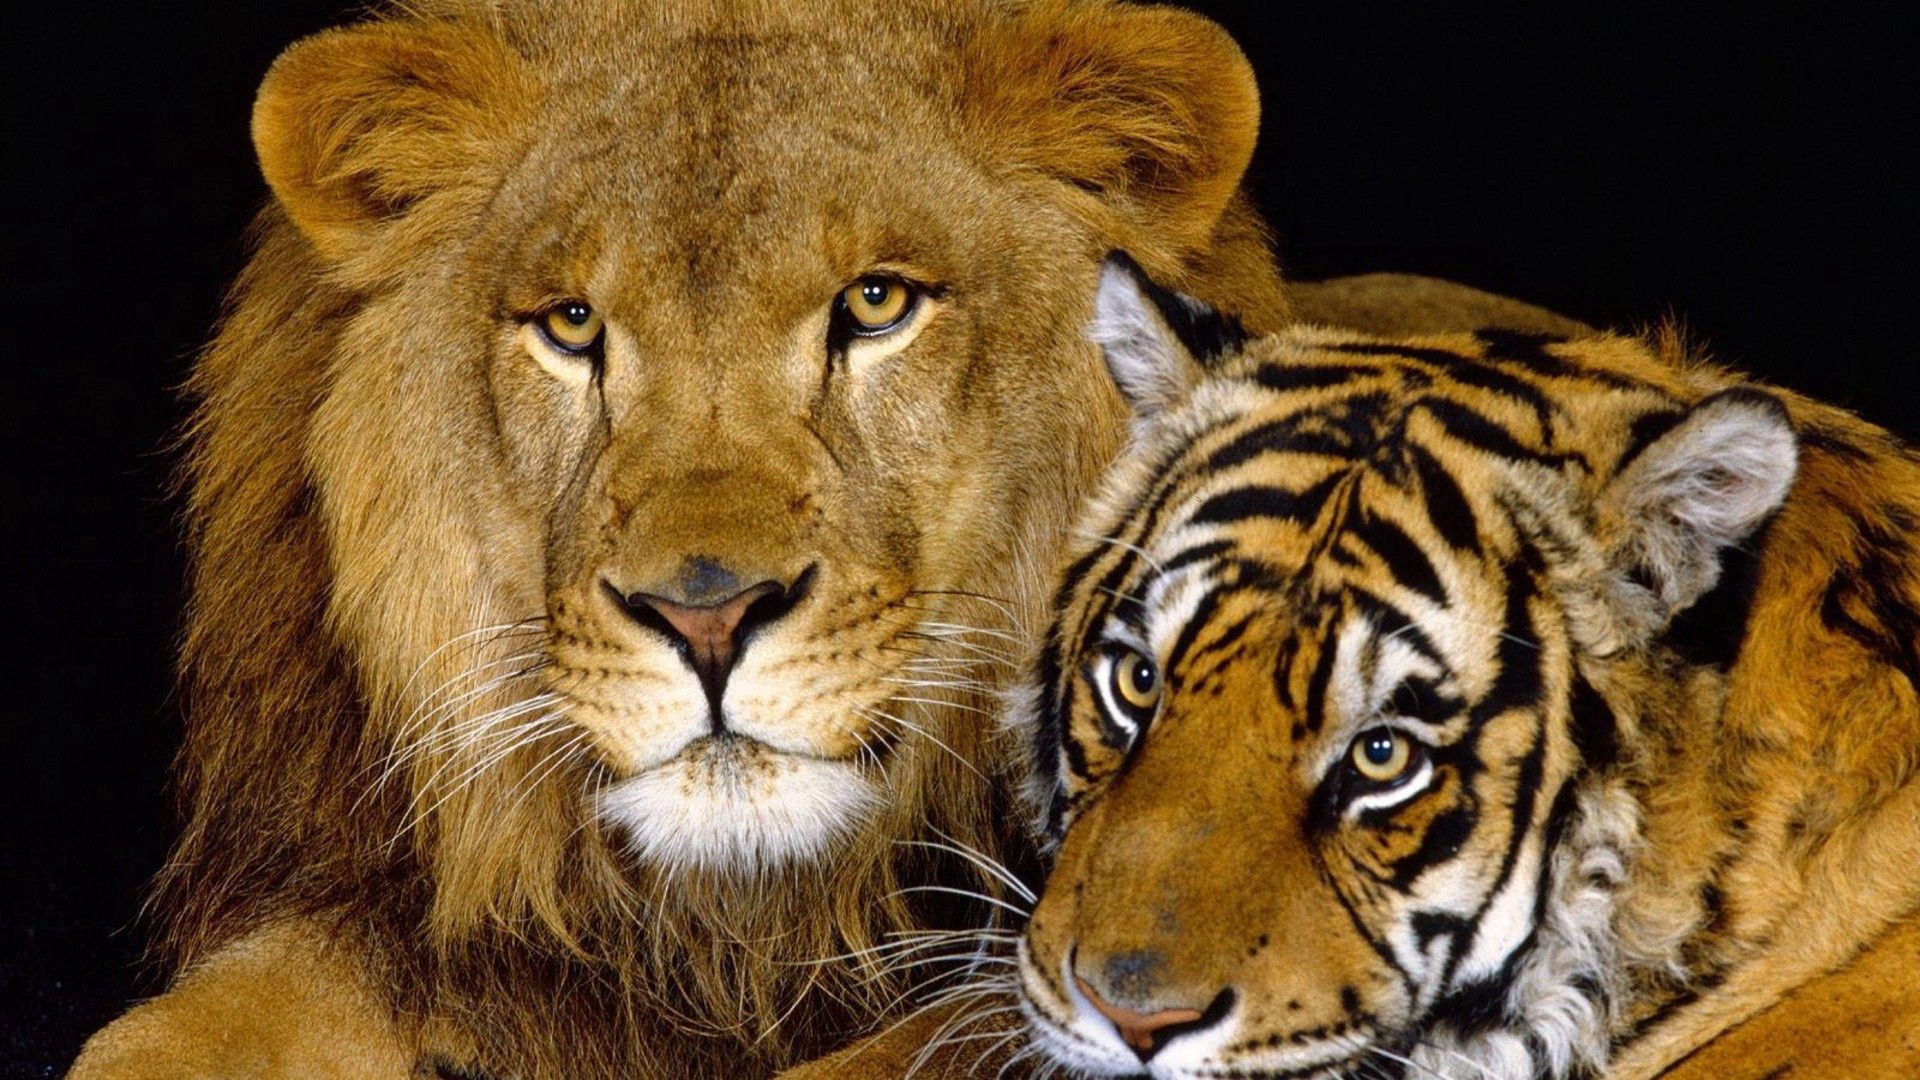 Download wallpaper 1920x1080 tiger, lion, cat family, big cats full hd,  hdtv, fhd, 1080p hd background